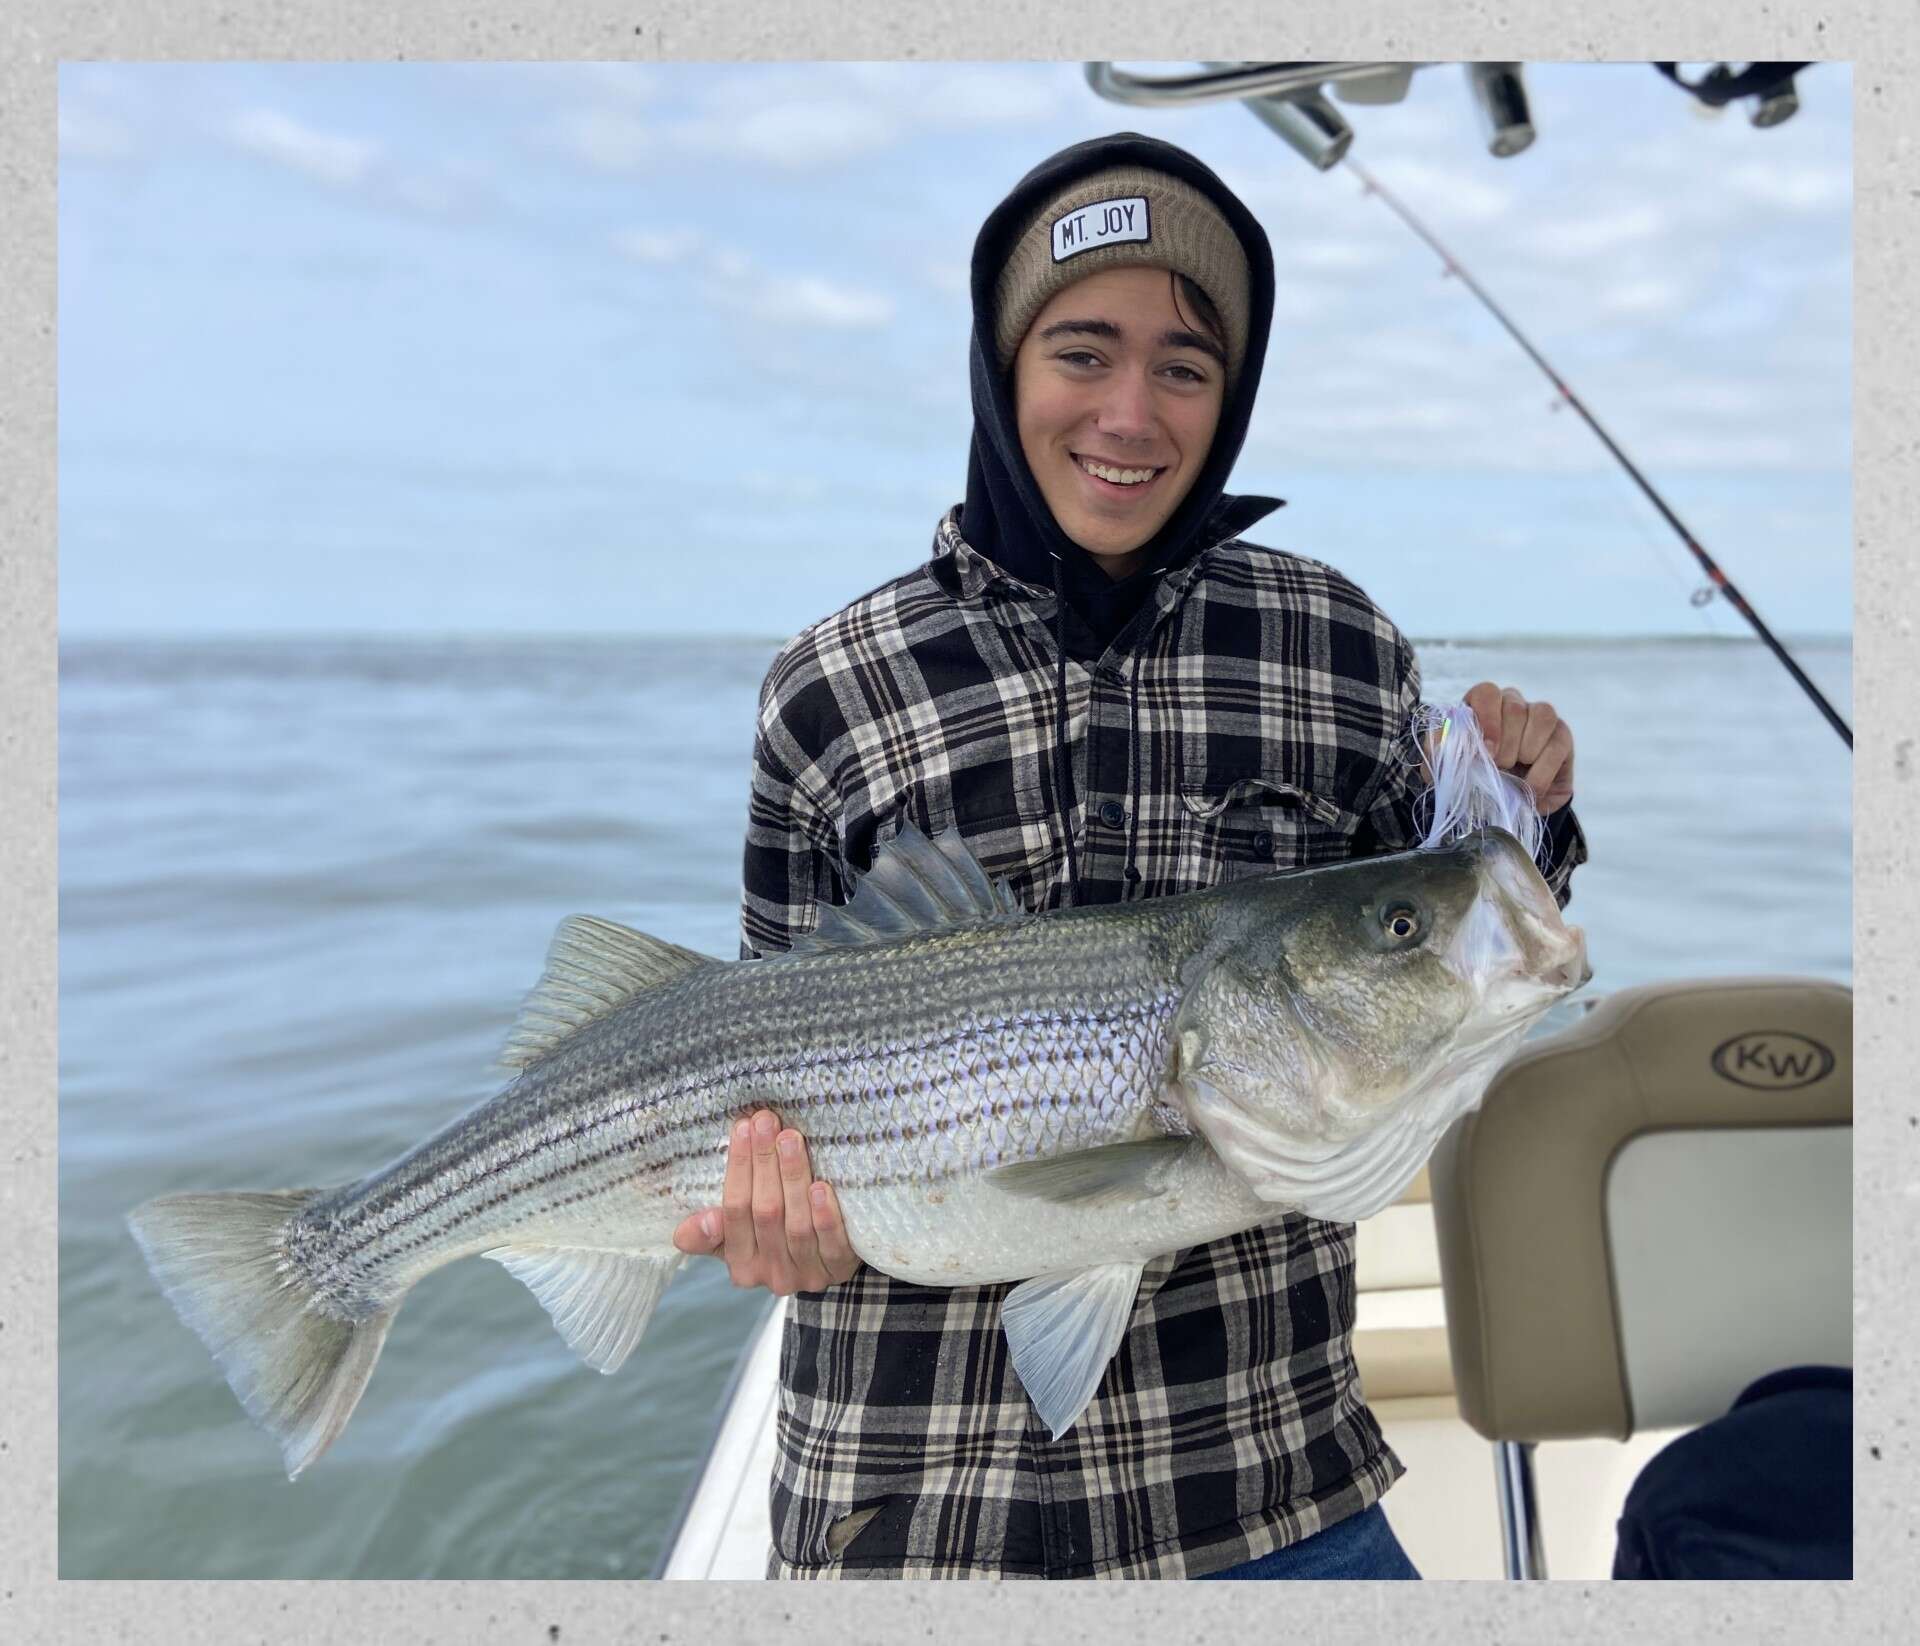 New technique/lure I learned about to target striped bass